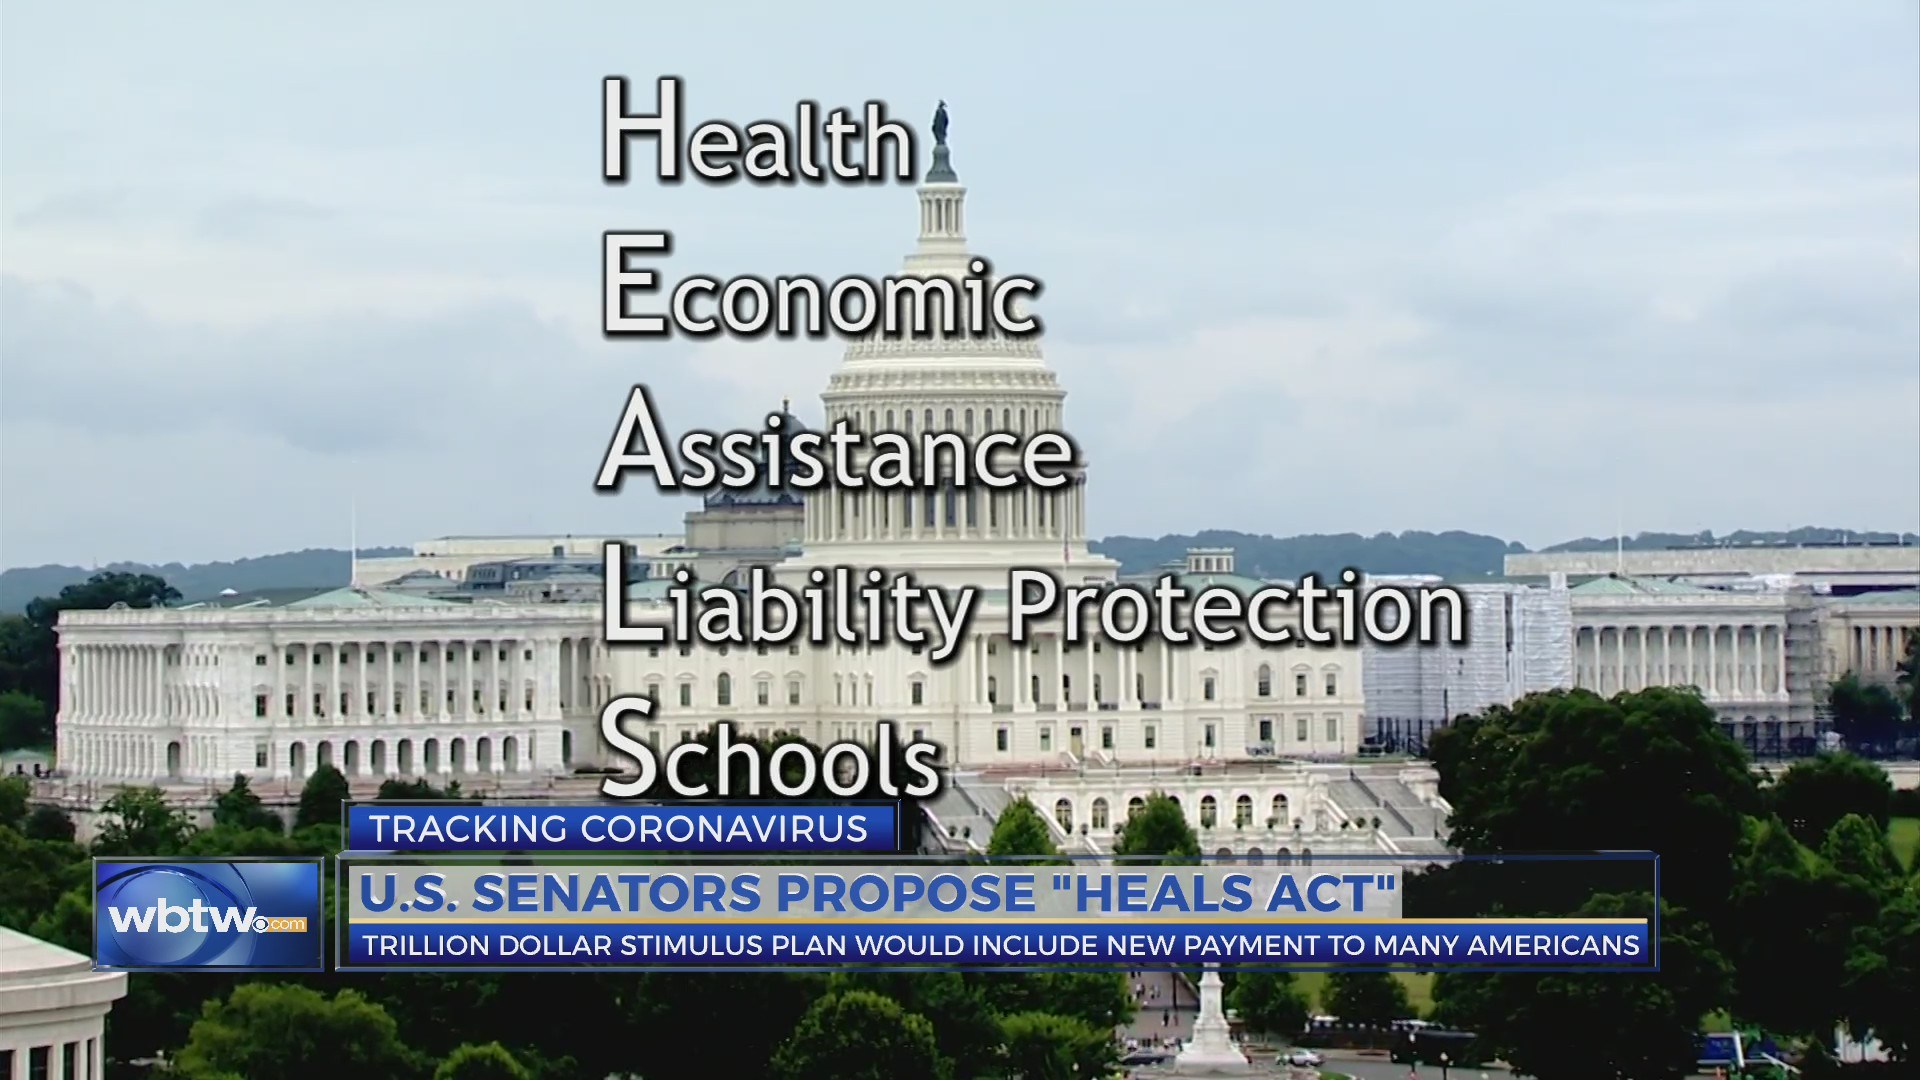 an image of the US capitol building with the acronym "HEALS Act: Health, Economics Assistance, liability protection, schools" in front of the image